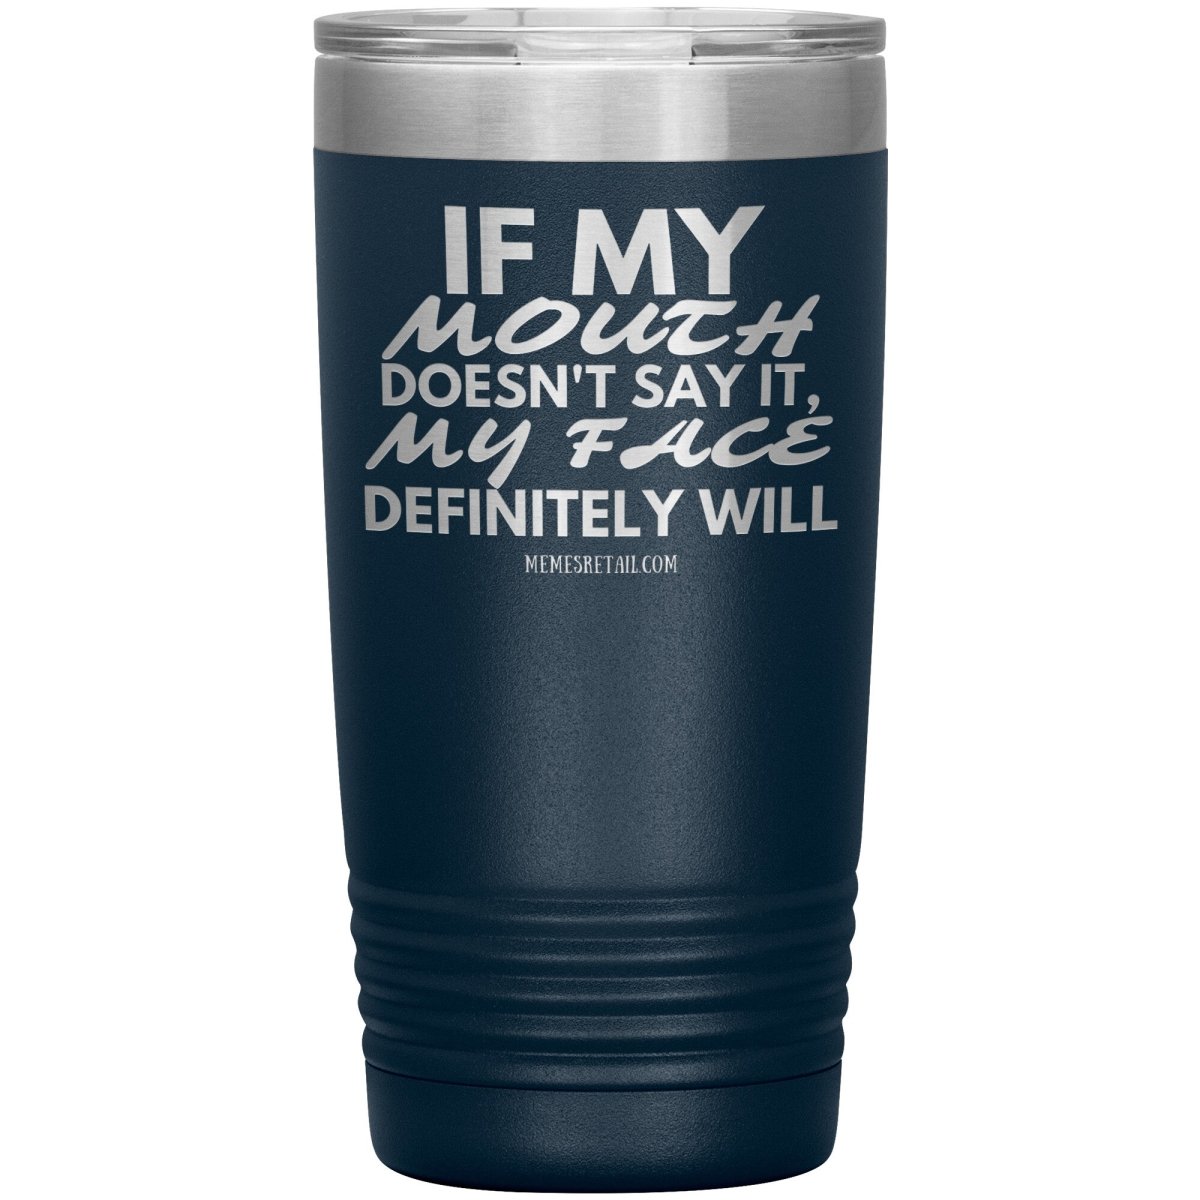 If my mouth doesn't say it, my face definitely will Tumblers, 20oz Insulated Tumbler / Navy - MemesRetail.com